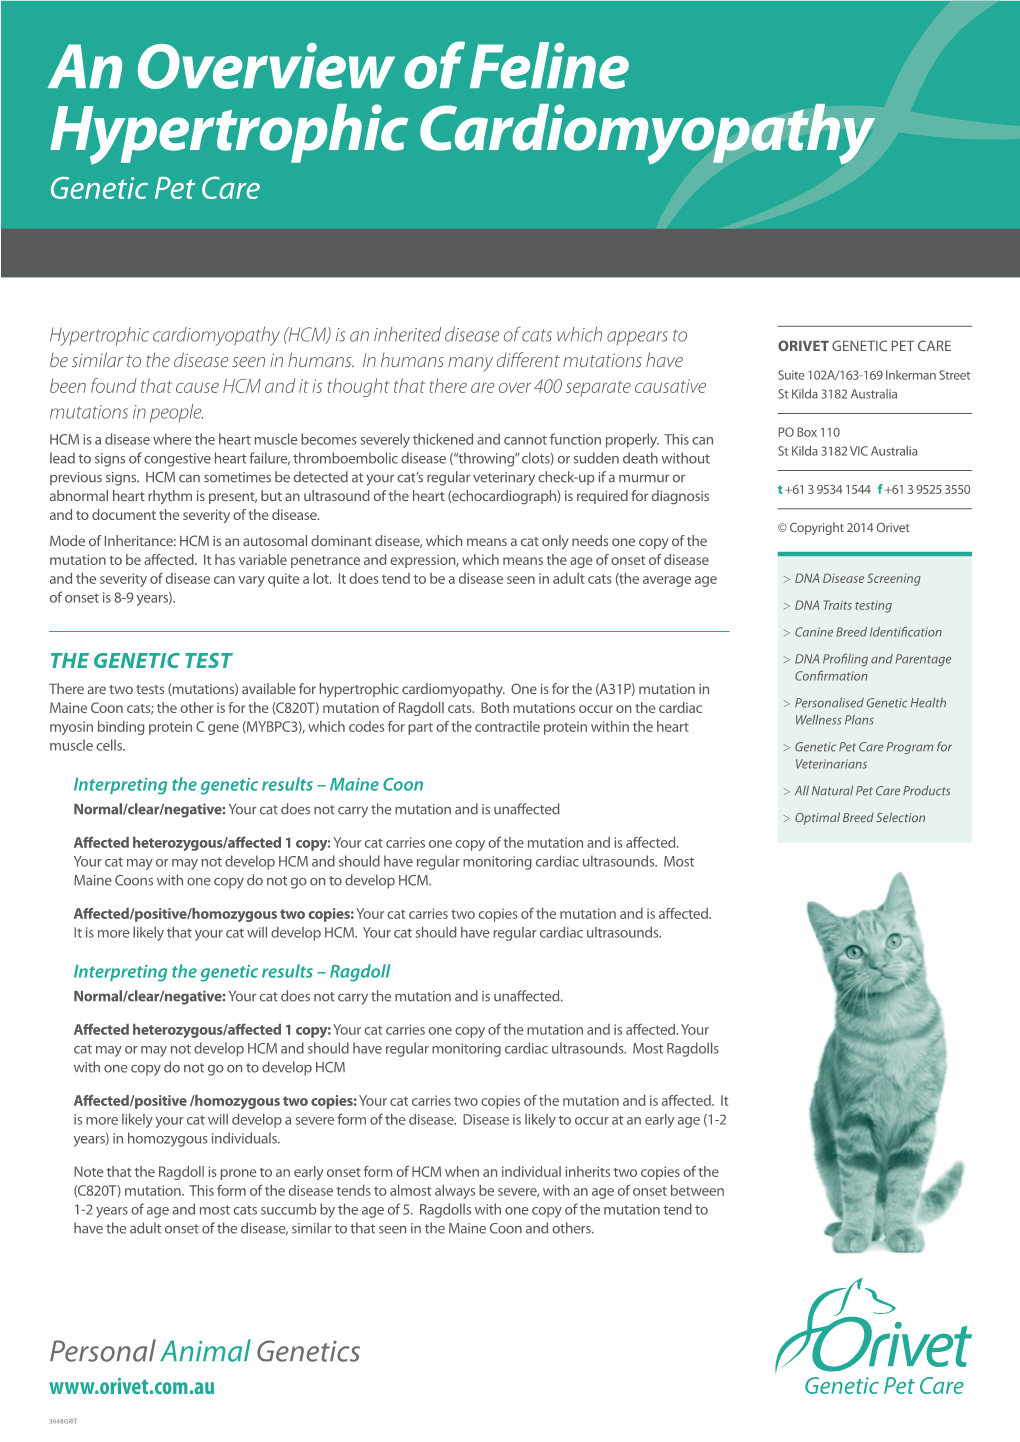 An Overview of Feline Hypertrophic Cardiomyopathy Genetic Pet Care